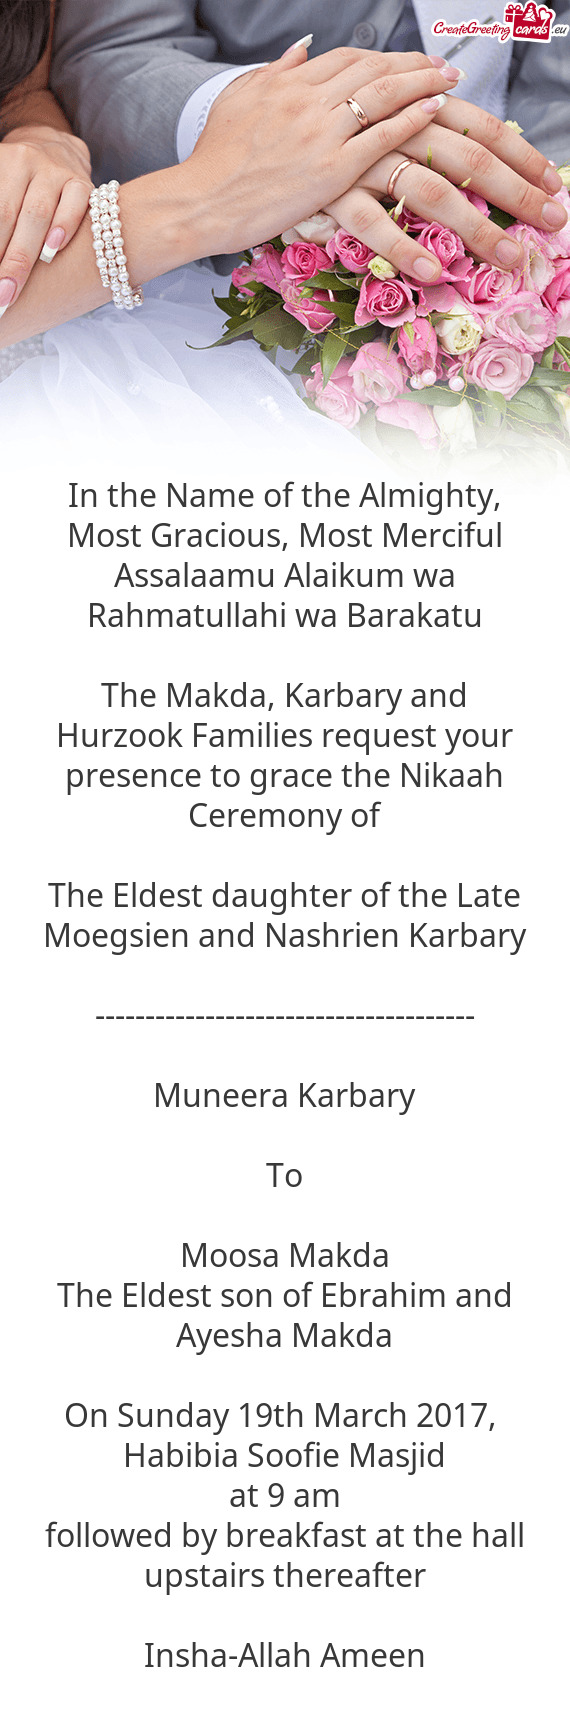 The Eldest daughter of the Late Moegsien and Nashrien Karbary